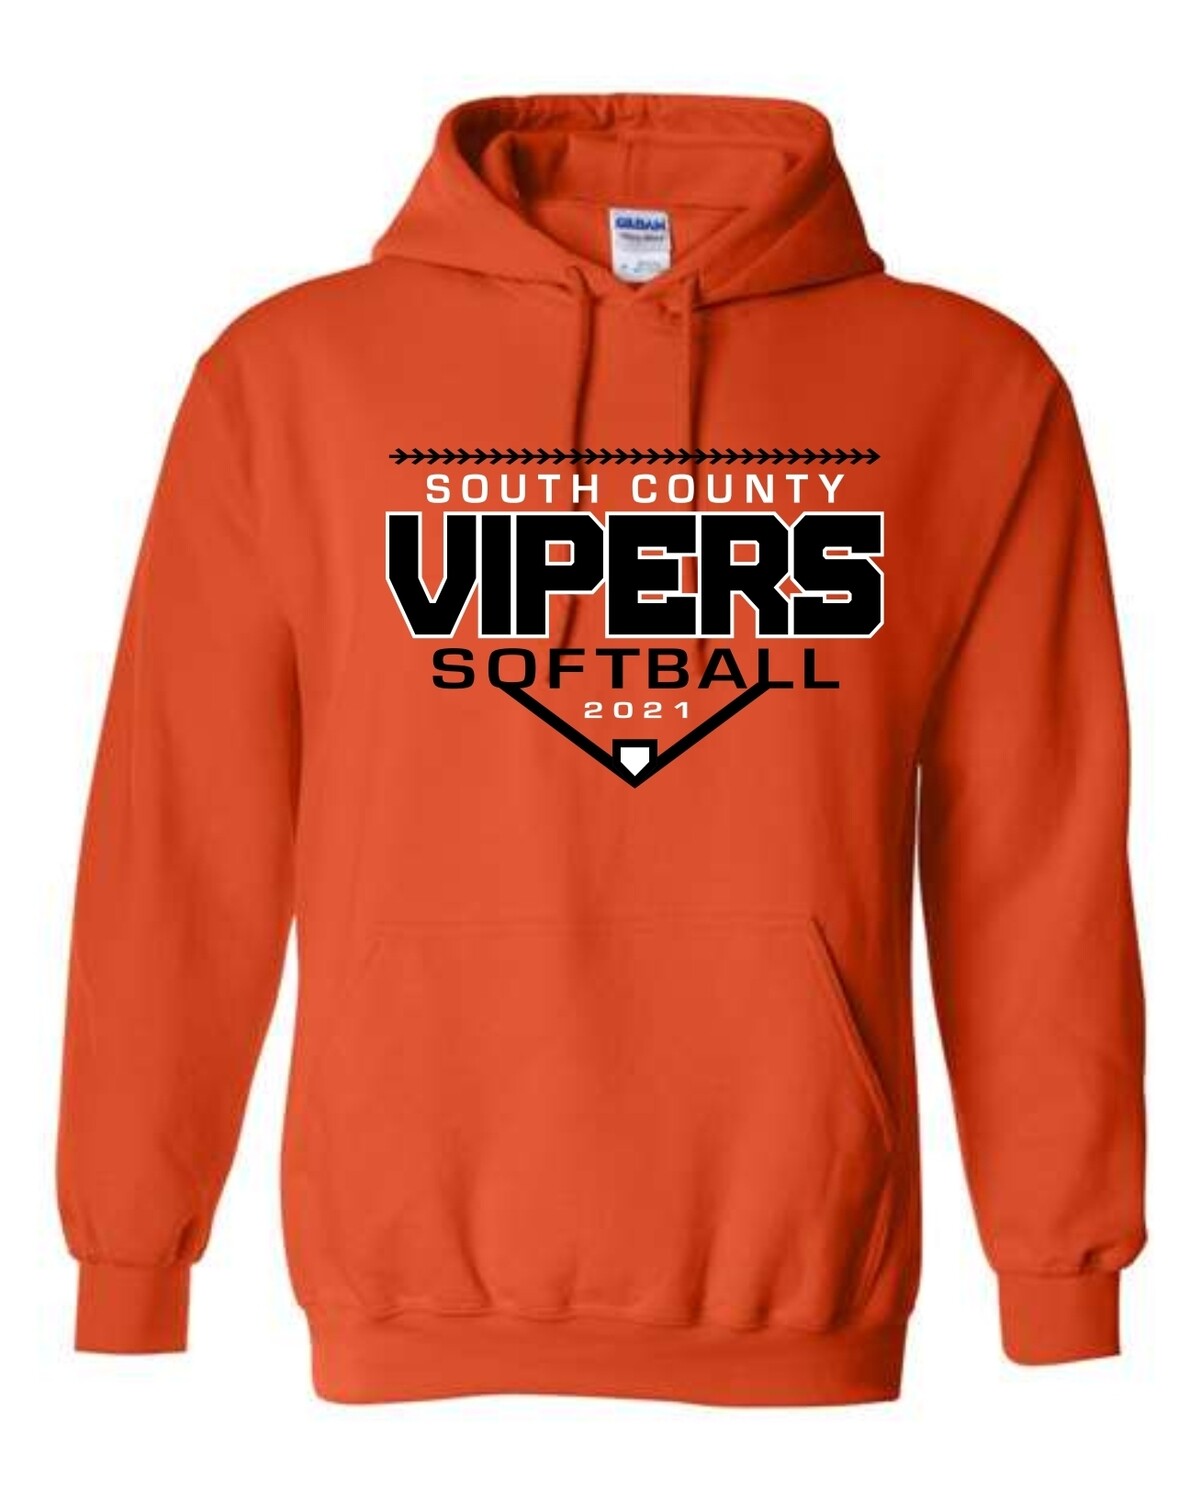 VIPERS SOFTBALL PULLOVER HOODIE-18500